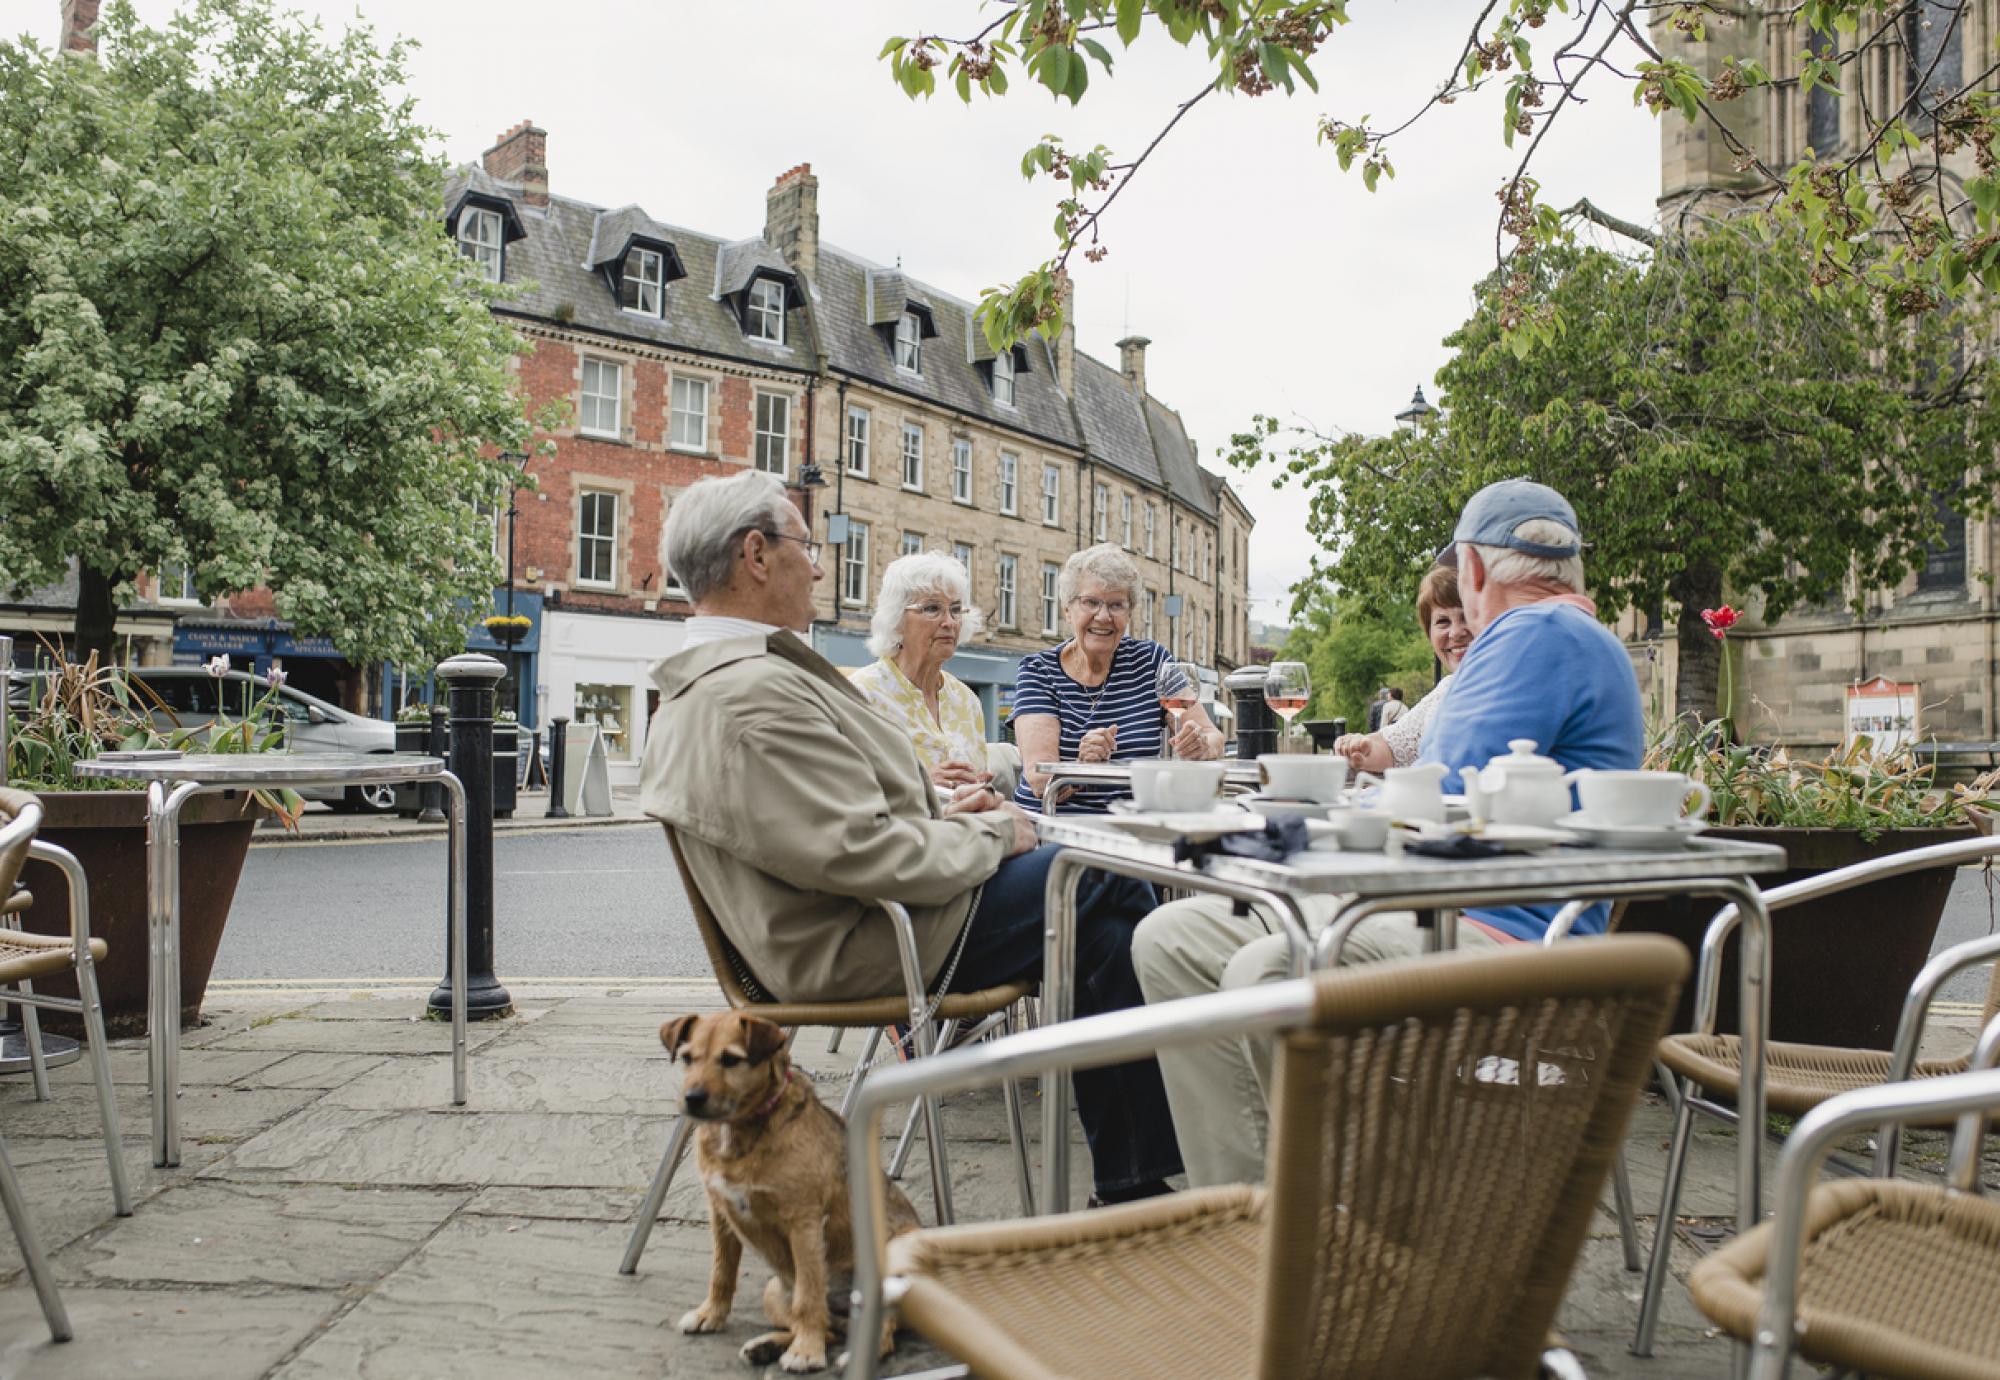 People sit outside a cafe in Hexham town centre